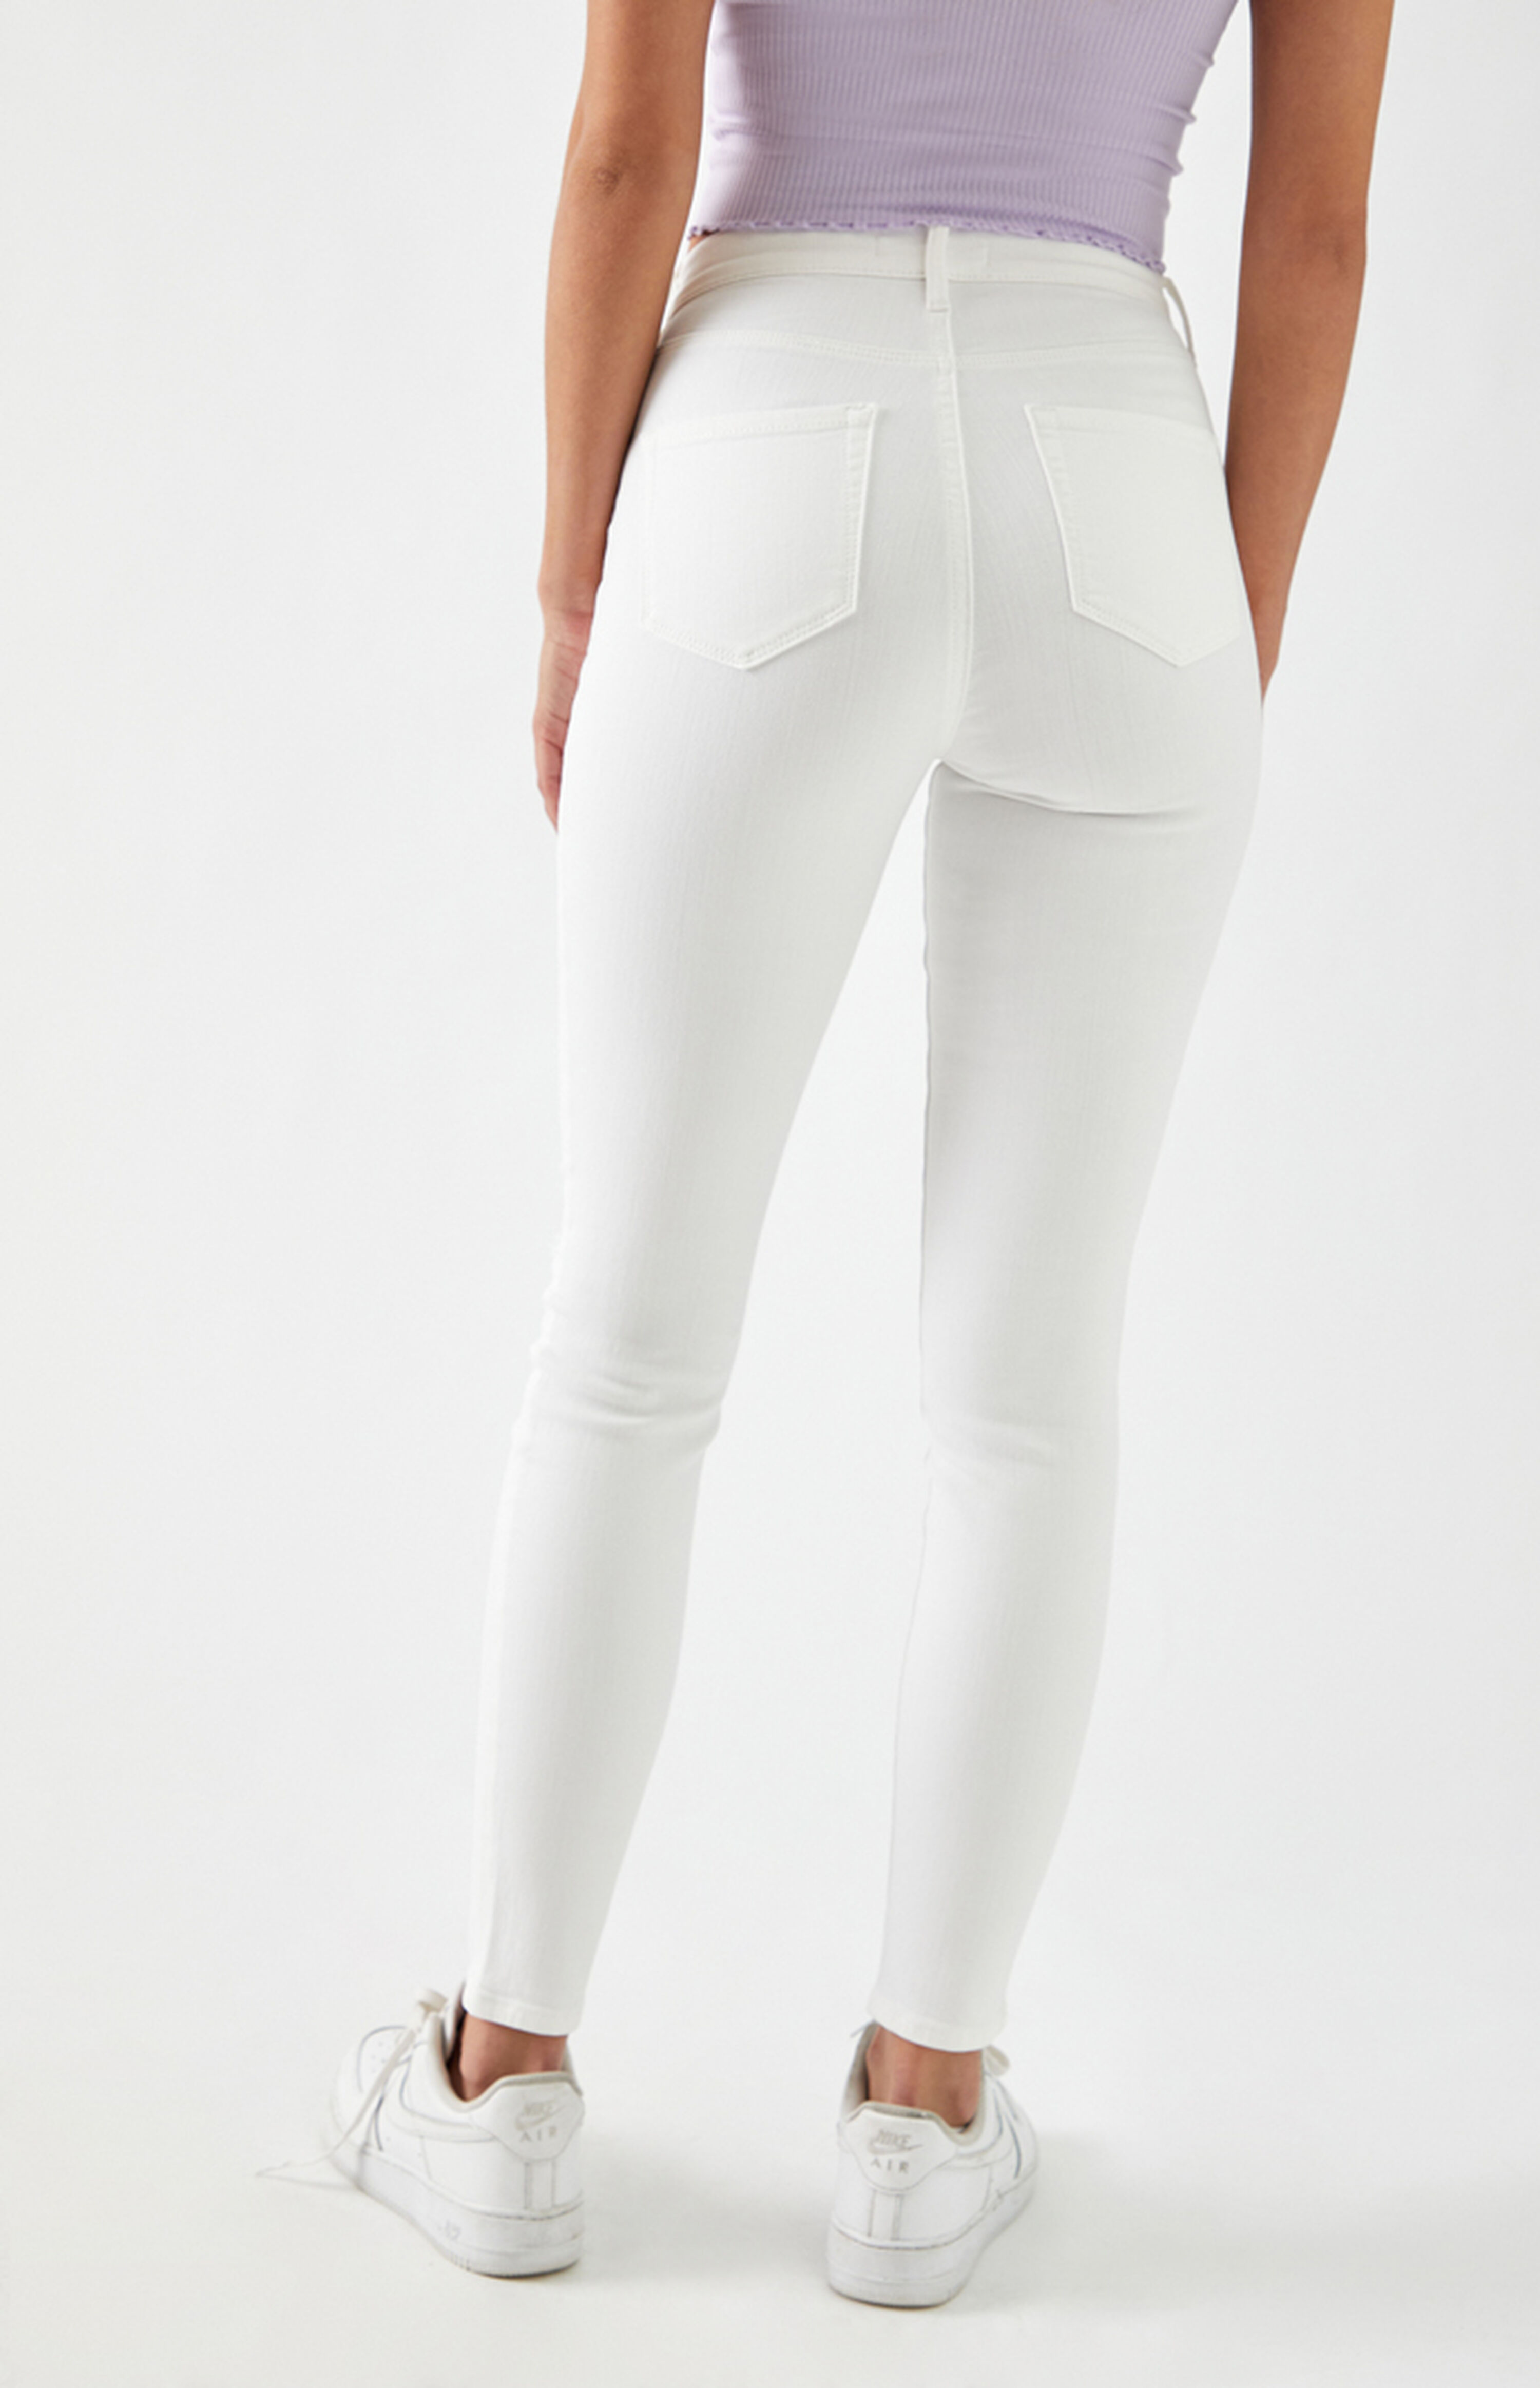 PacSun White High Waisted Jeggings | PacSun